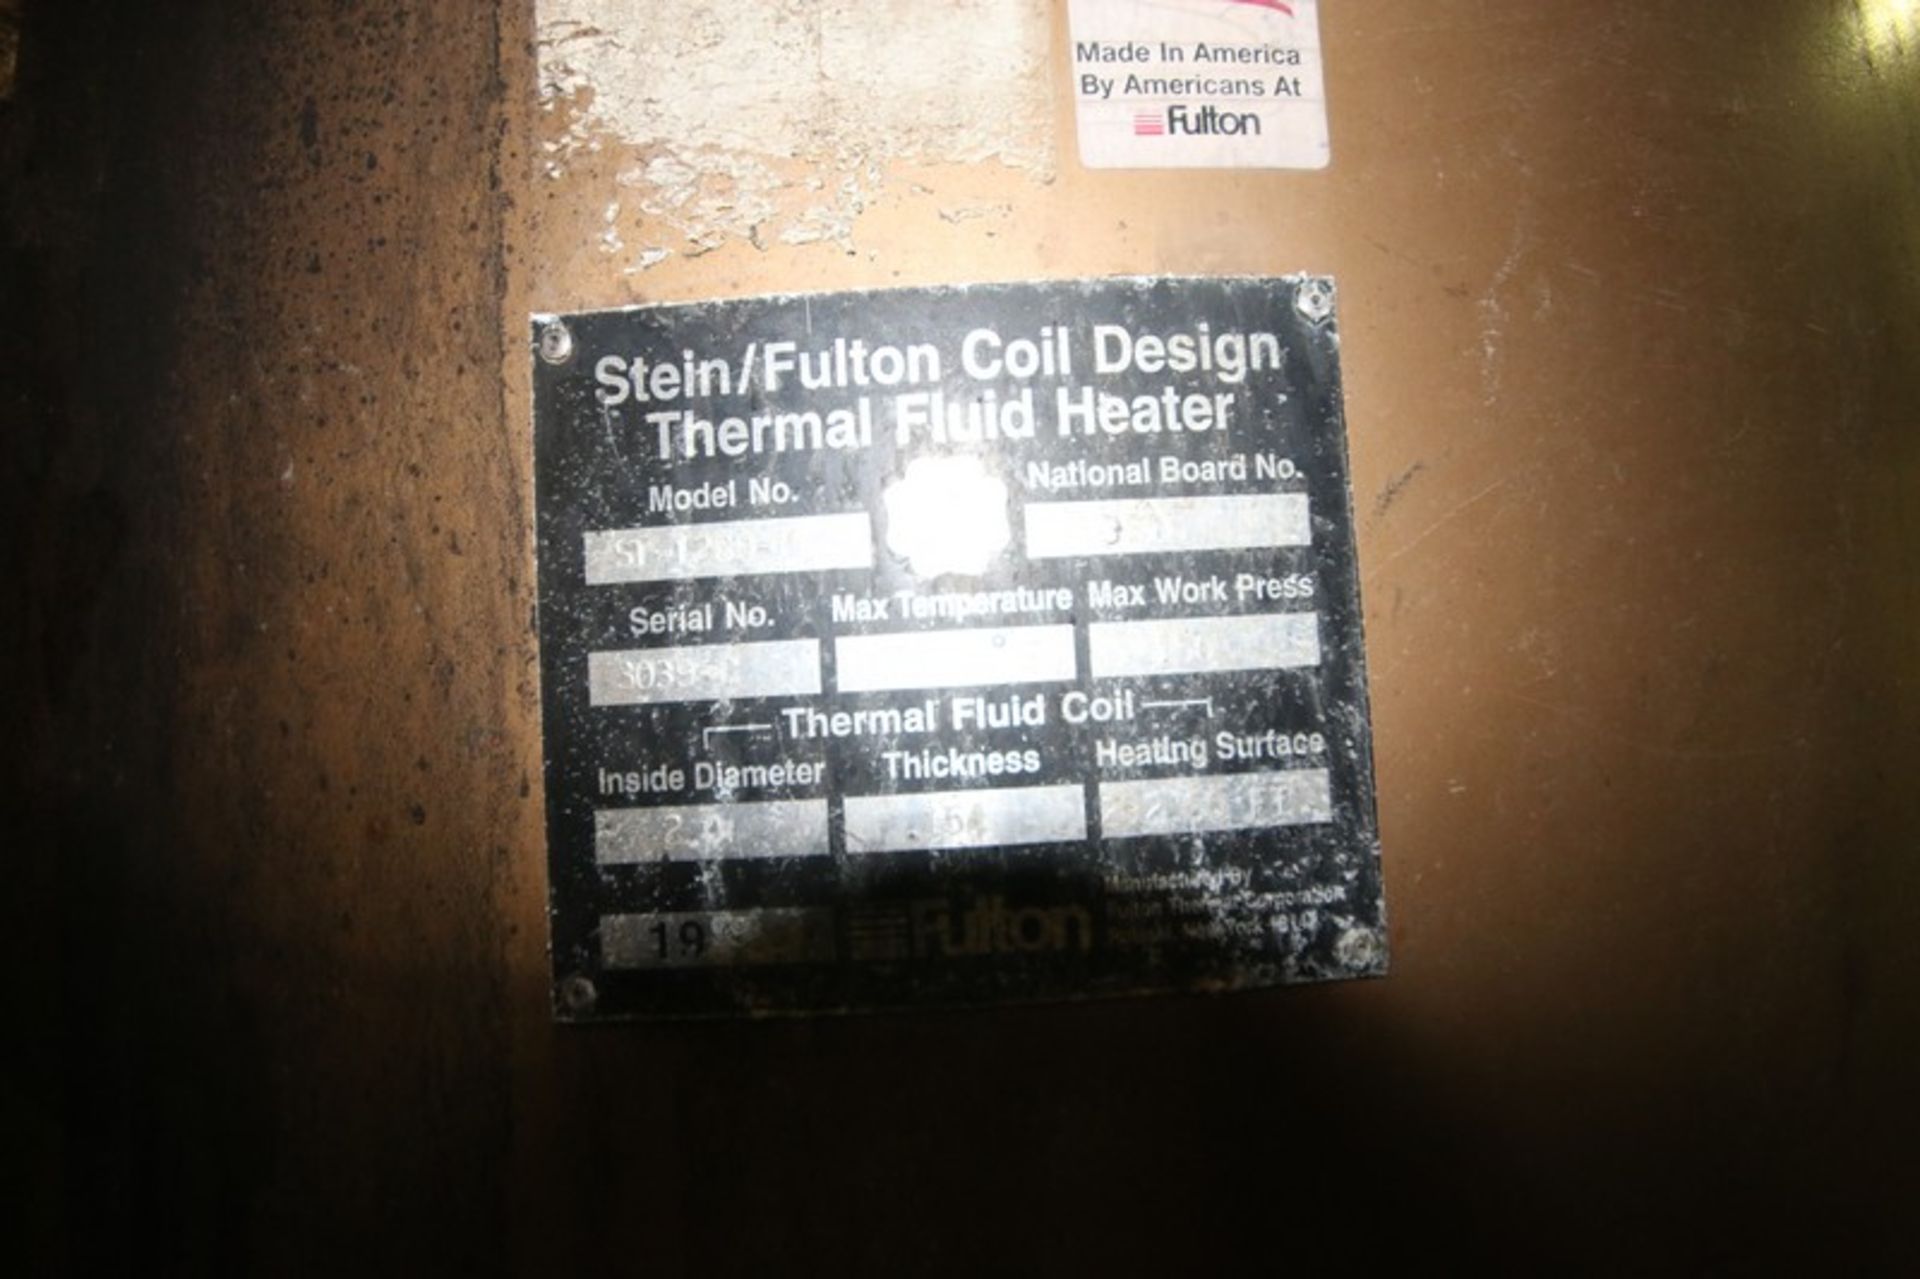 Stein/Fulton Coil Design Thermal Fluid Heater, M/N ST-1260-F, S/N 3039-C, with (2) additional Pump & - Image 10 of 13